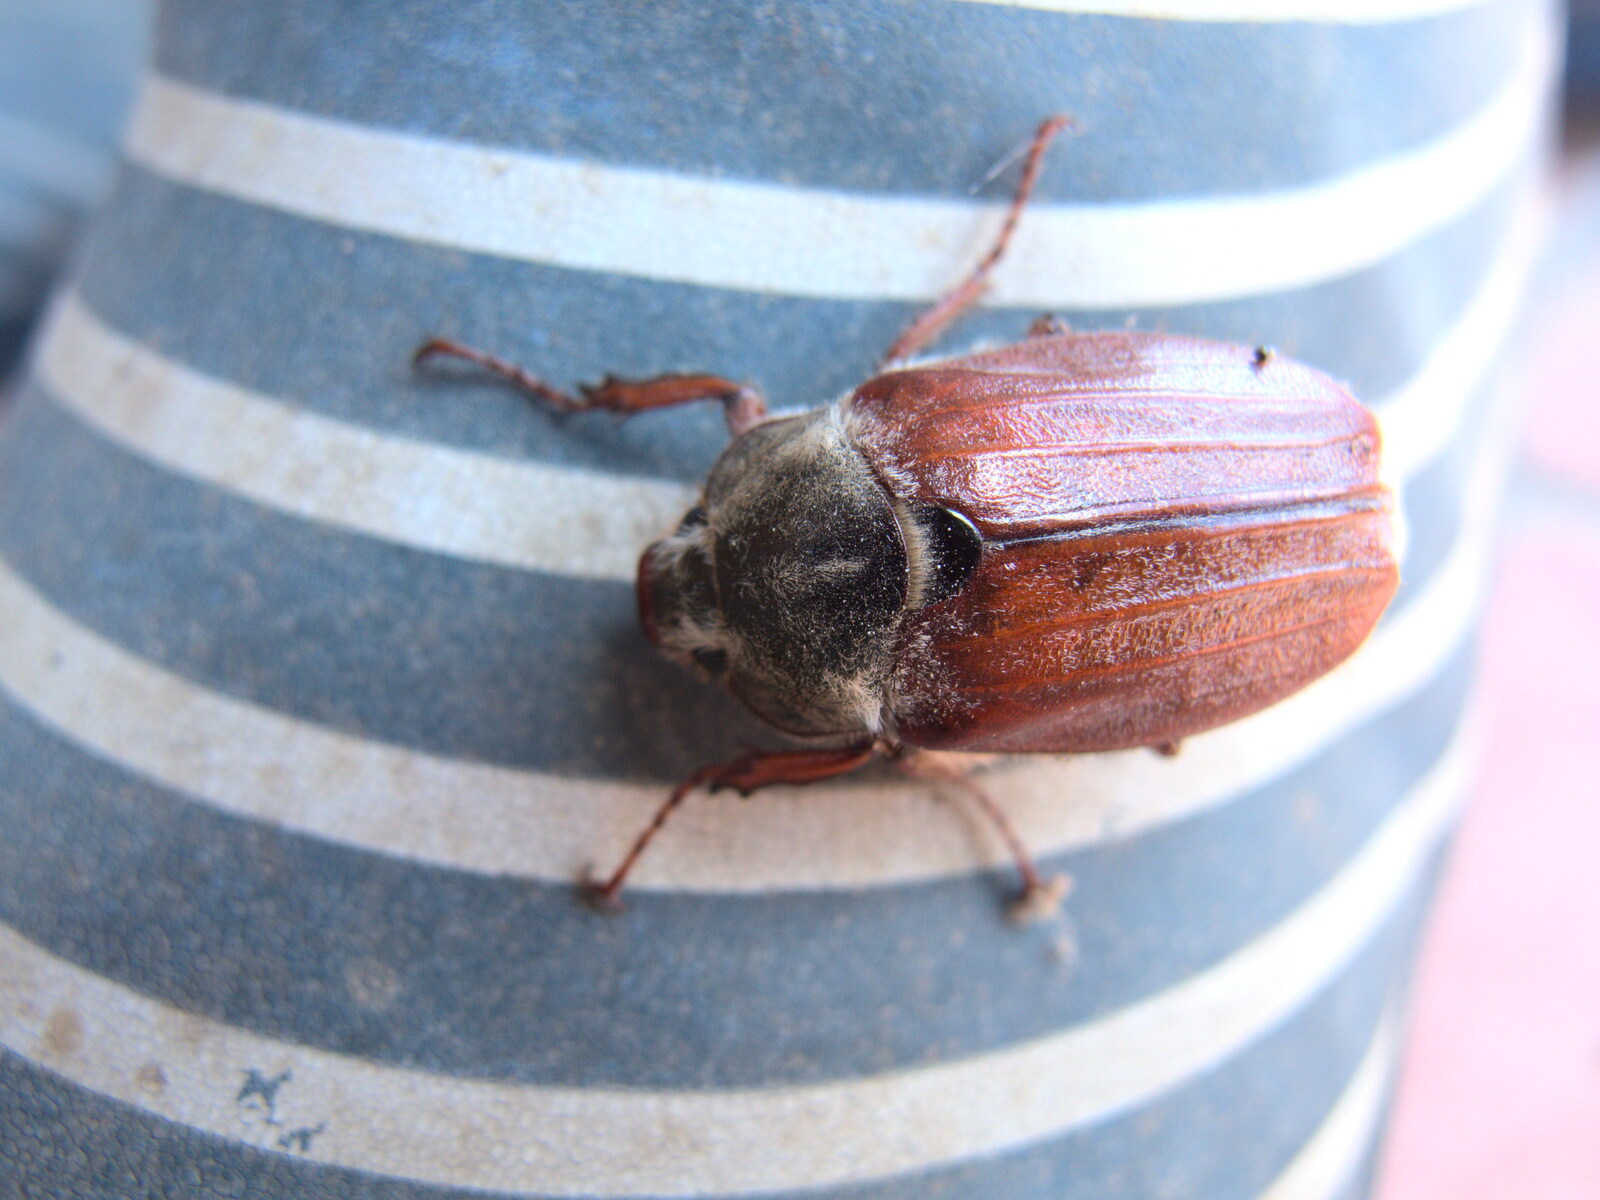 There's a huge beetle on a welly boot from The Old Brickworks and a New Road, Hoxne and Eye, Suffolk - 26th May 2020